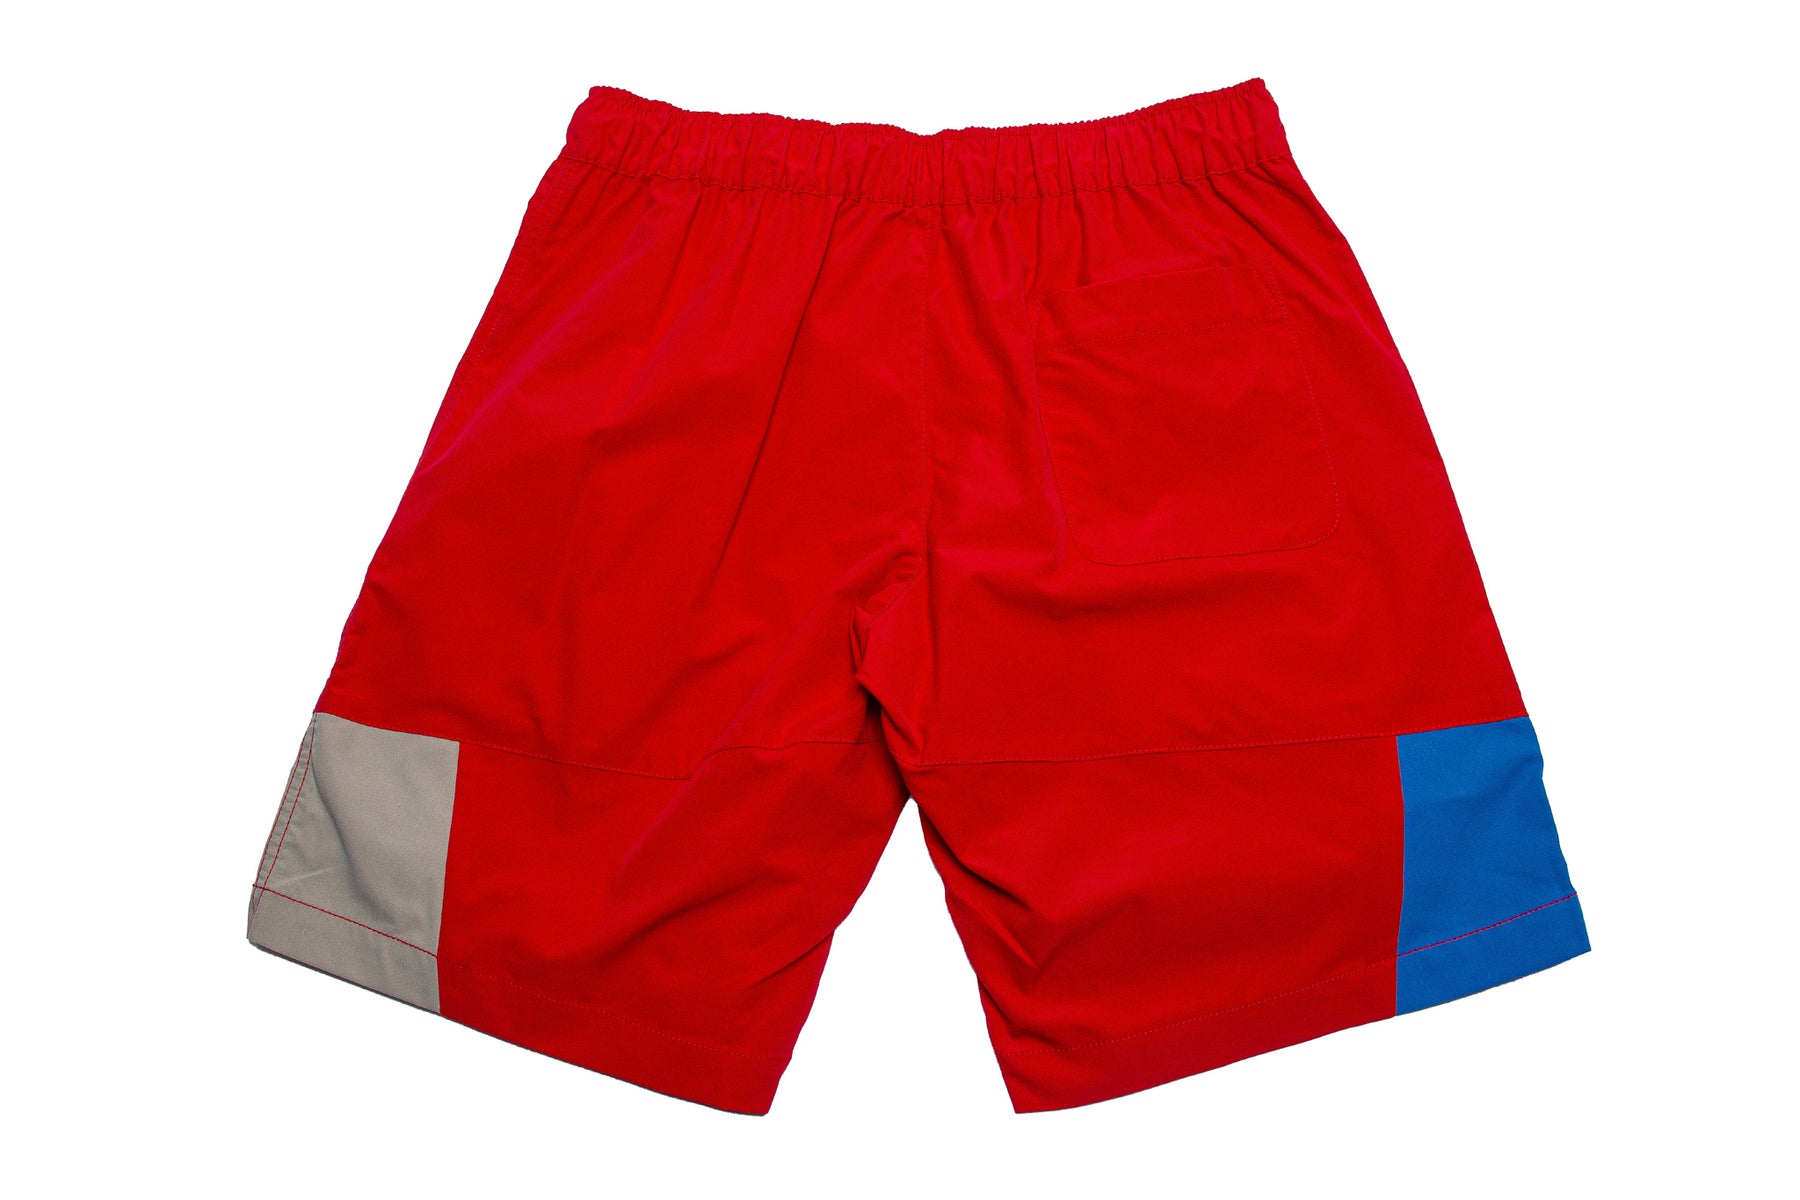 AlphaStyle Nash Hiking Short "Red"